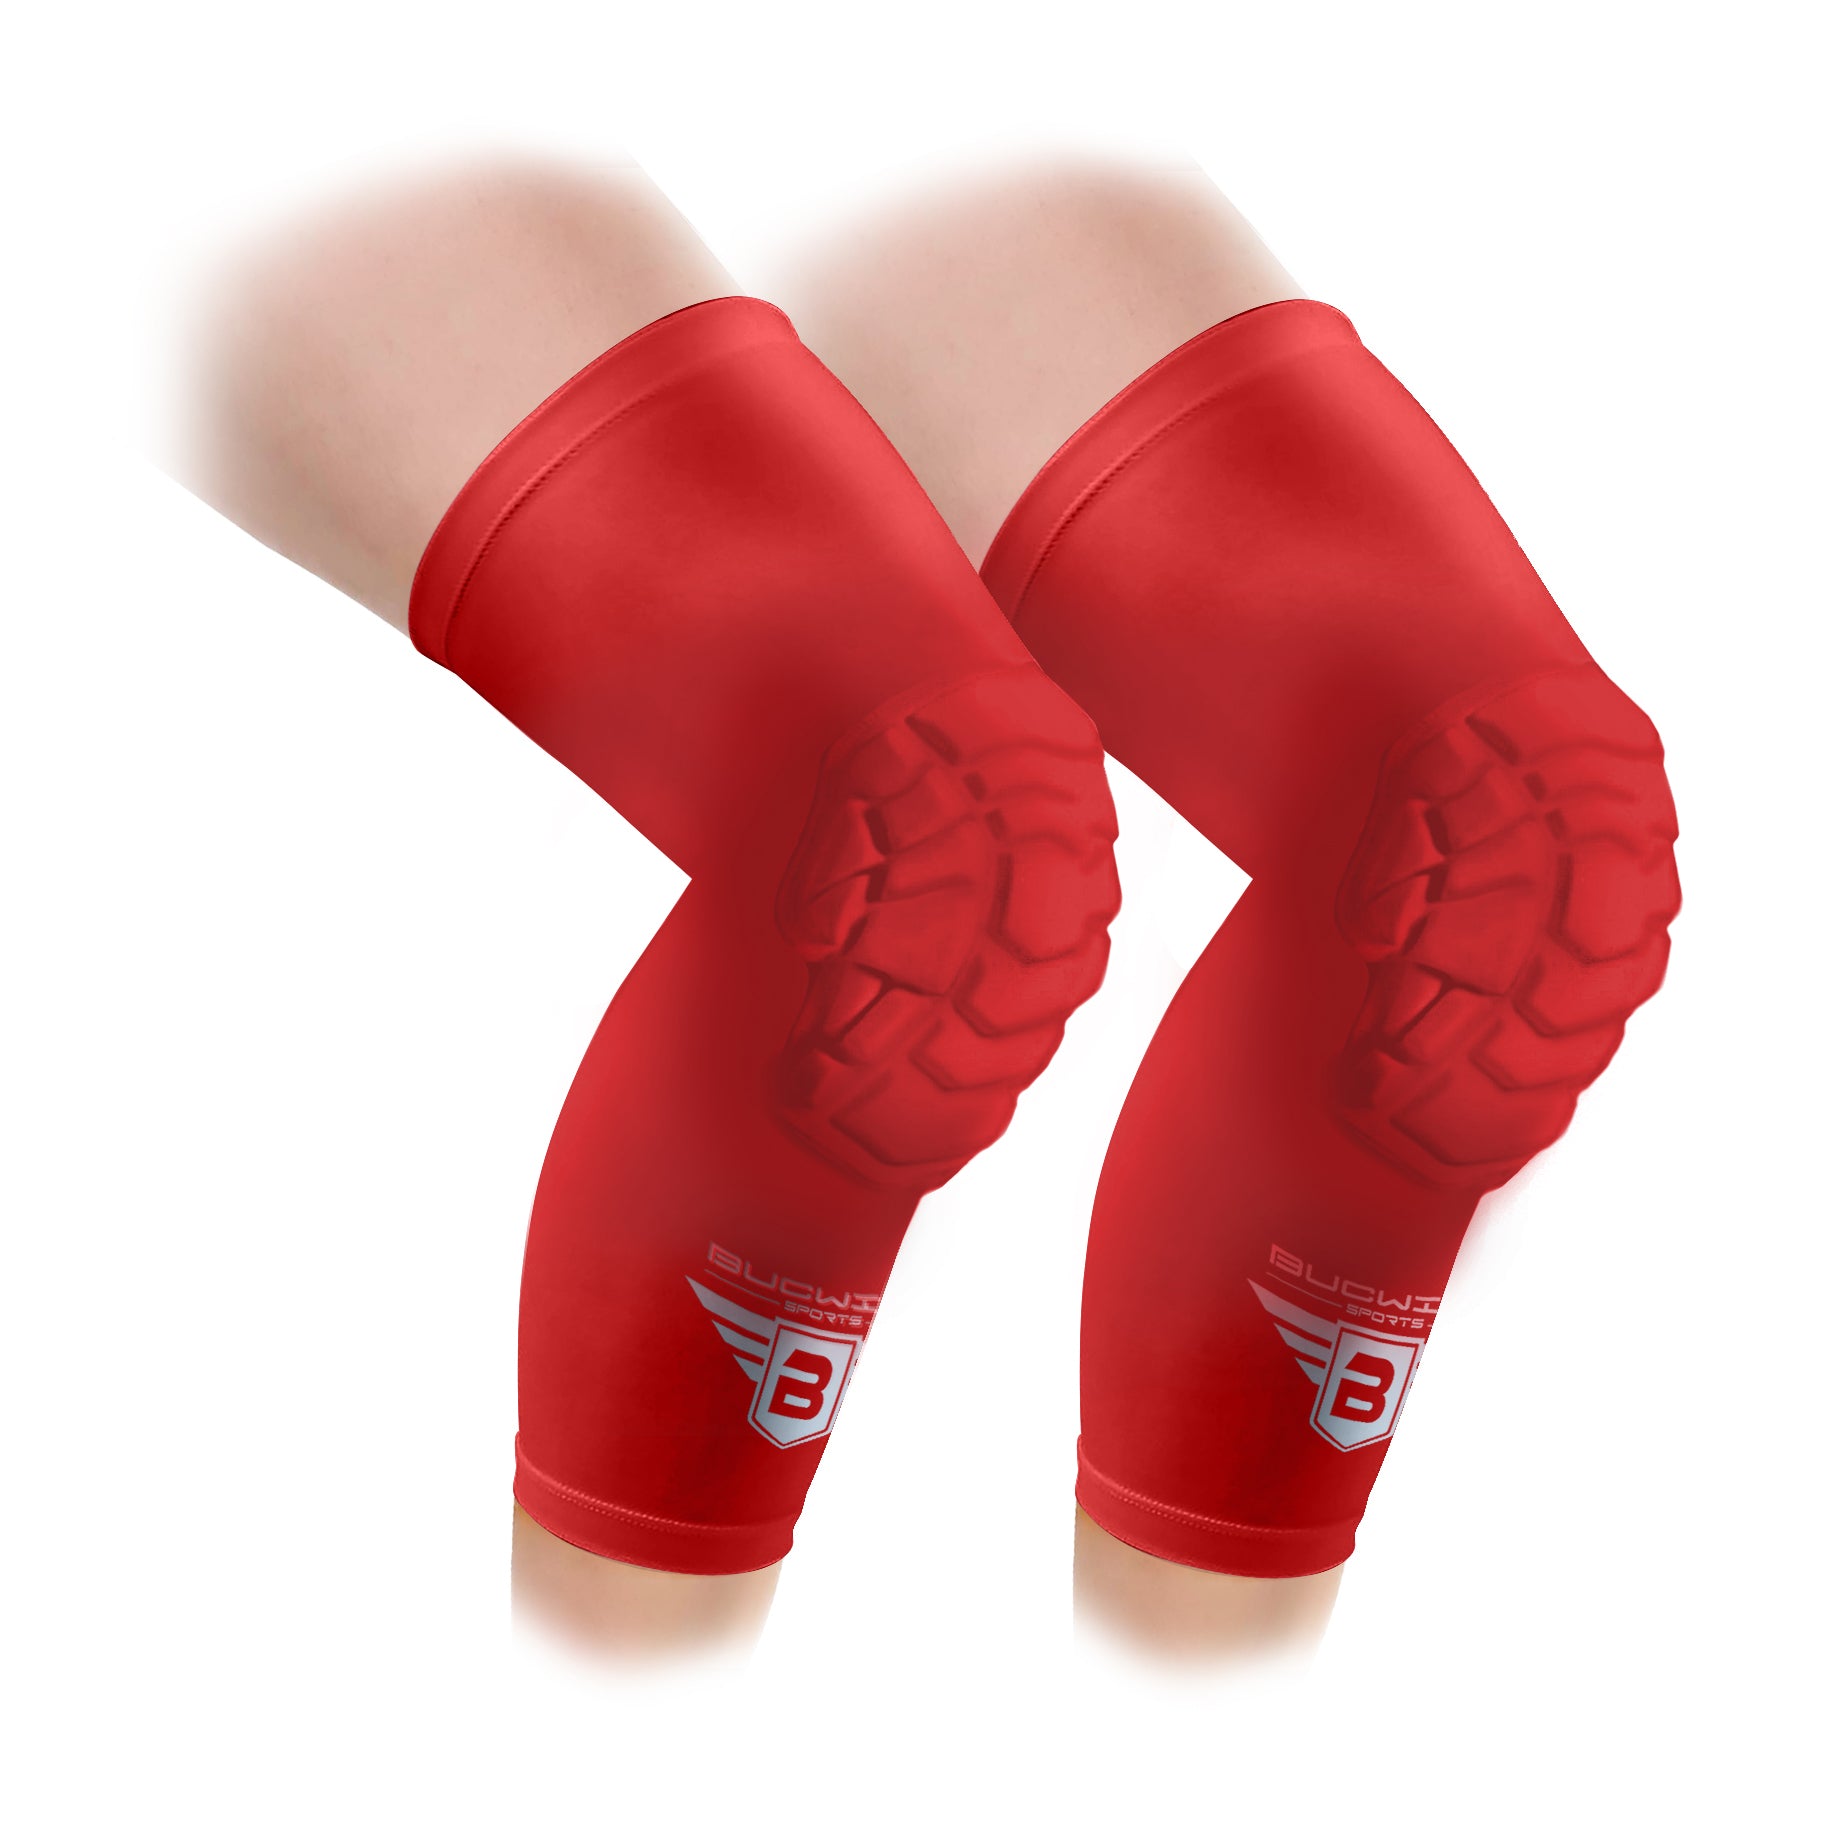 Compression Knee Pads - Padded Leg Sleeves (1 Pair) - Red